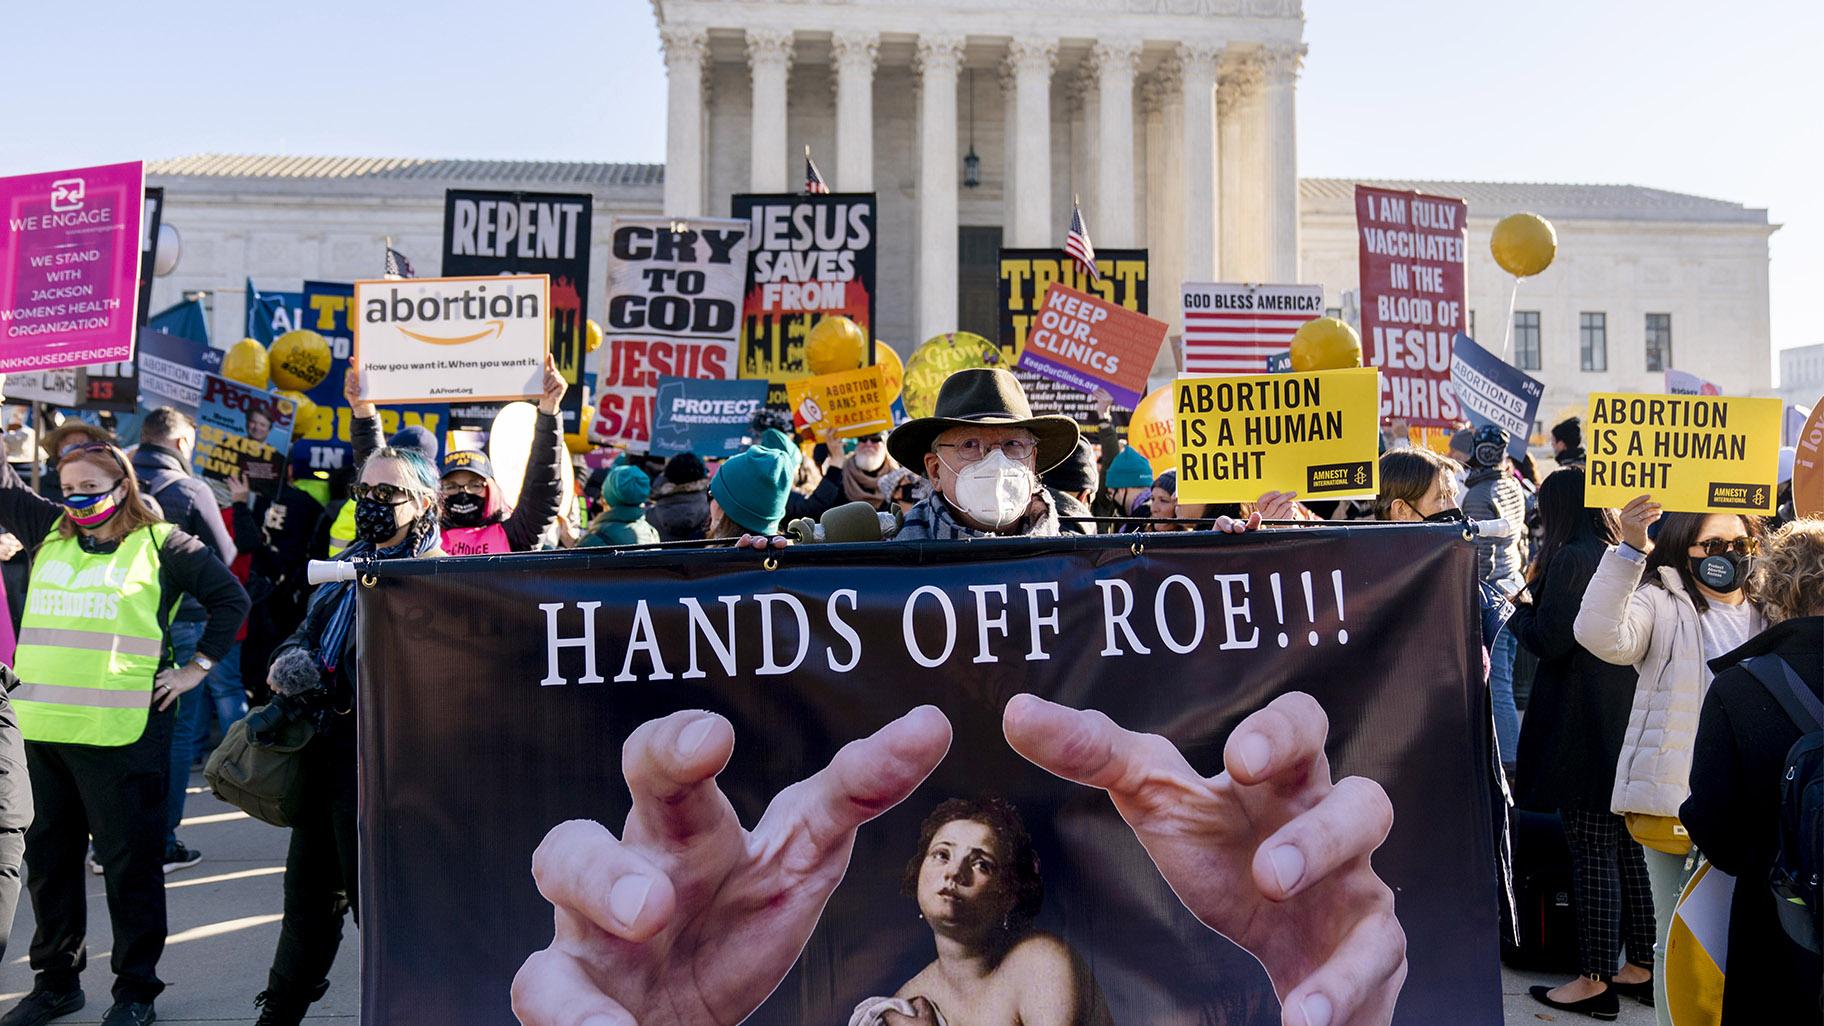 Stephen Parlato of Boulder, Colo., holds a sign that reads "Hands Off Roe!!!" as abortion rights advocates and anti-abortion protesters demonstrate in front of the U.S. Supreme Court, Dec. 1, 2021, in Washington, as the court hears arguments in a case from Mississippi, where a 2018 law would ban abortions after 15 weeks of pregnancy, well before viability. (AP Photo / Andrew Harnik, File) 